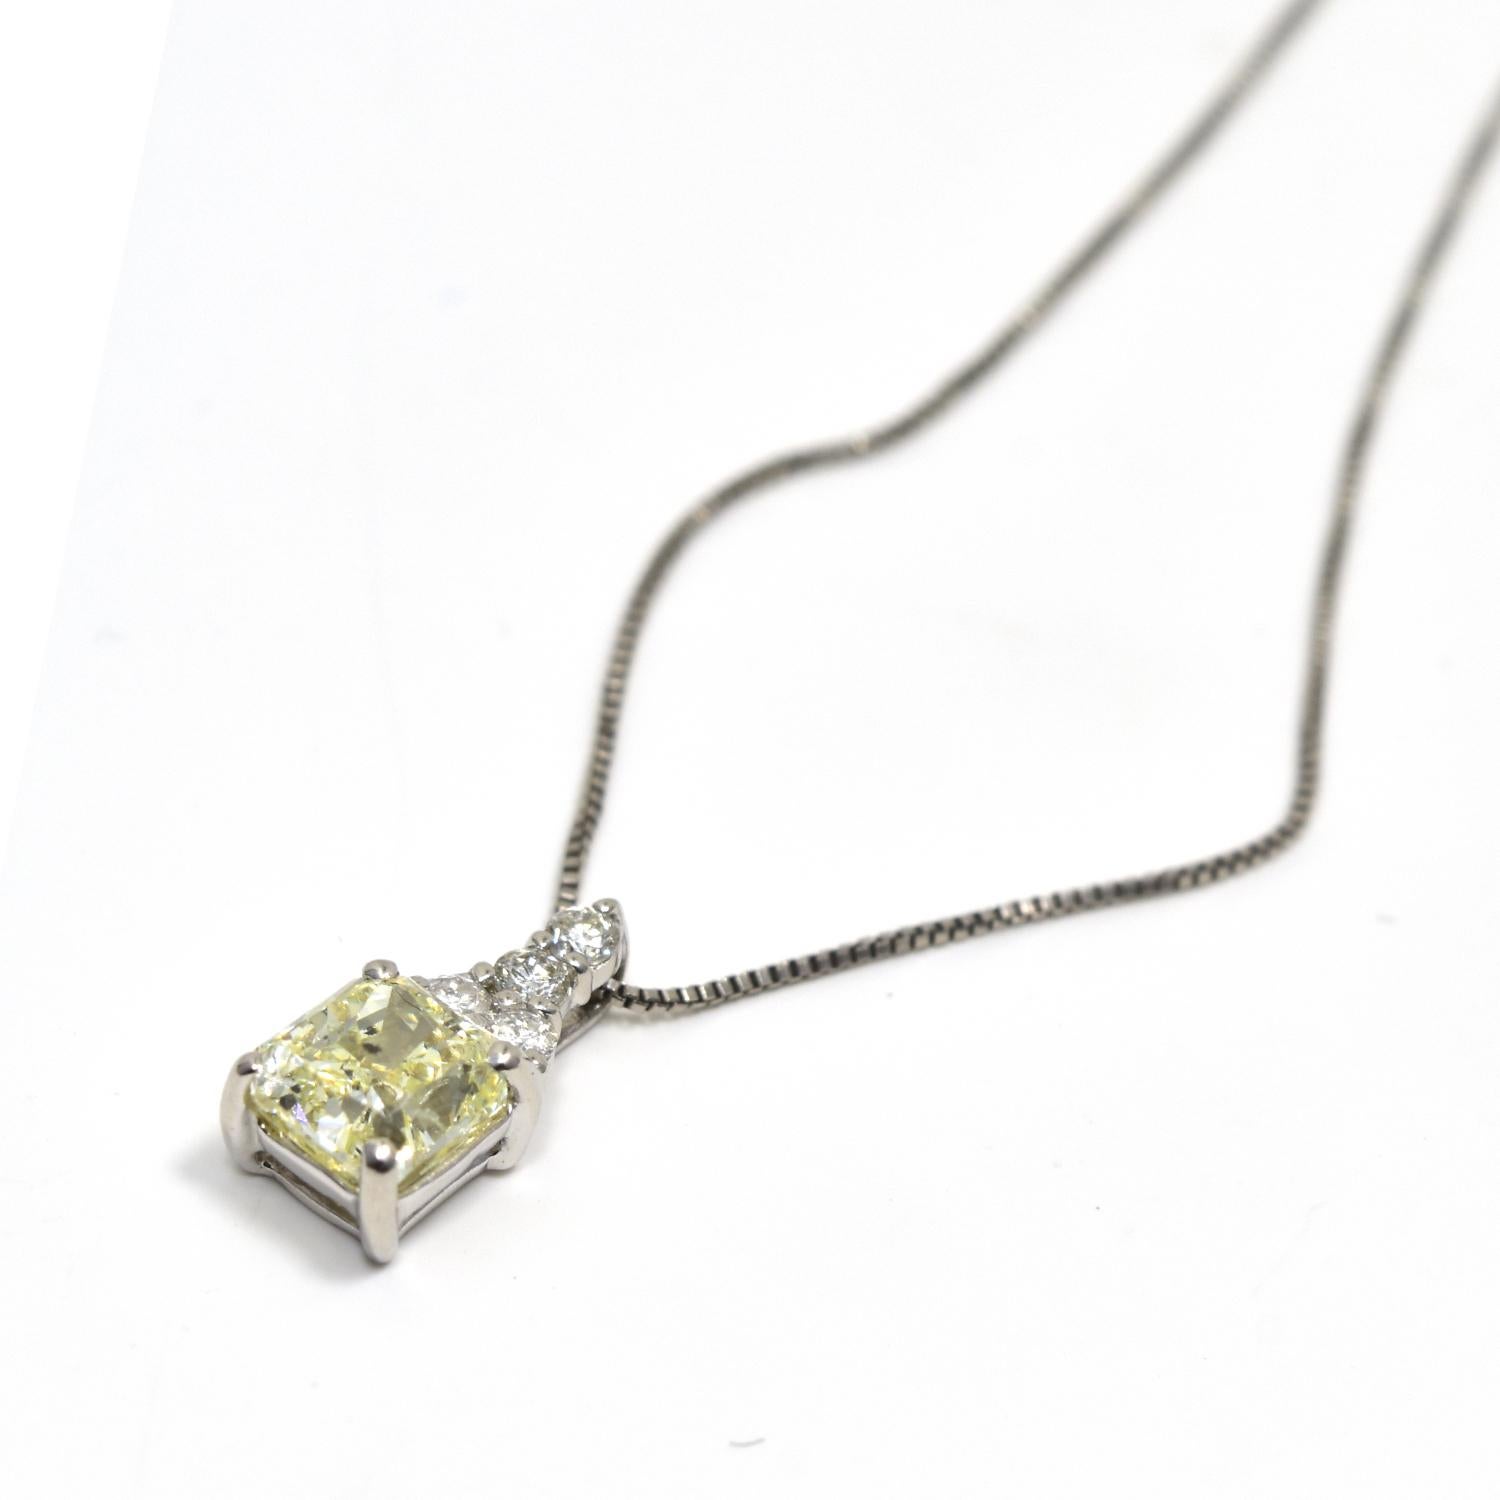 Style: Pendant Necklace

Metal: Platinum

Metal Purity: 850

Stones: Yellow Diamond 1 ctw

White Diamonds .10 ctw

Total Carat Weight: approx. 1.10 ct

Total Item Weight (grams): 2.7

Necklace Length: 16 inches

Includes: Brilliance Jewels Necklace